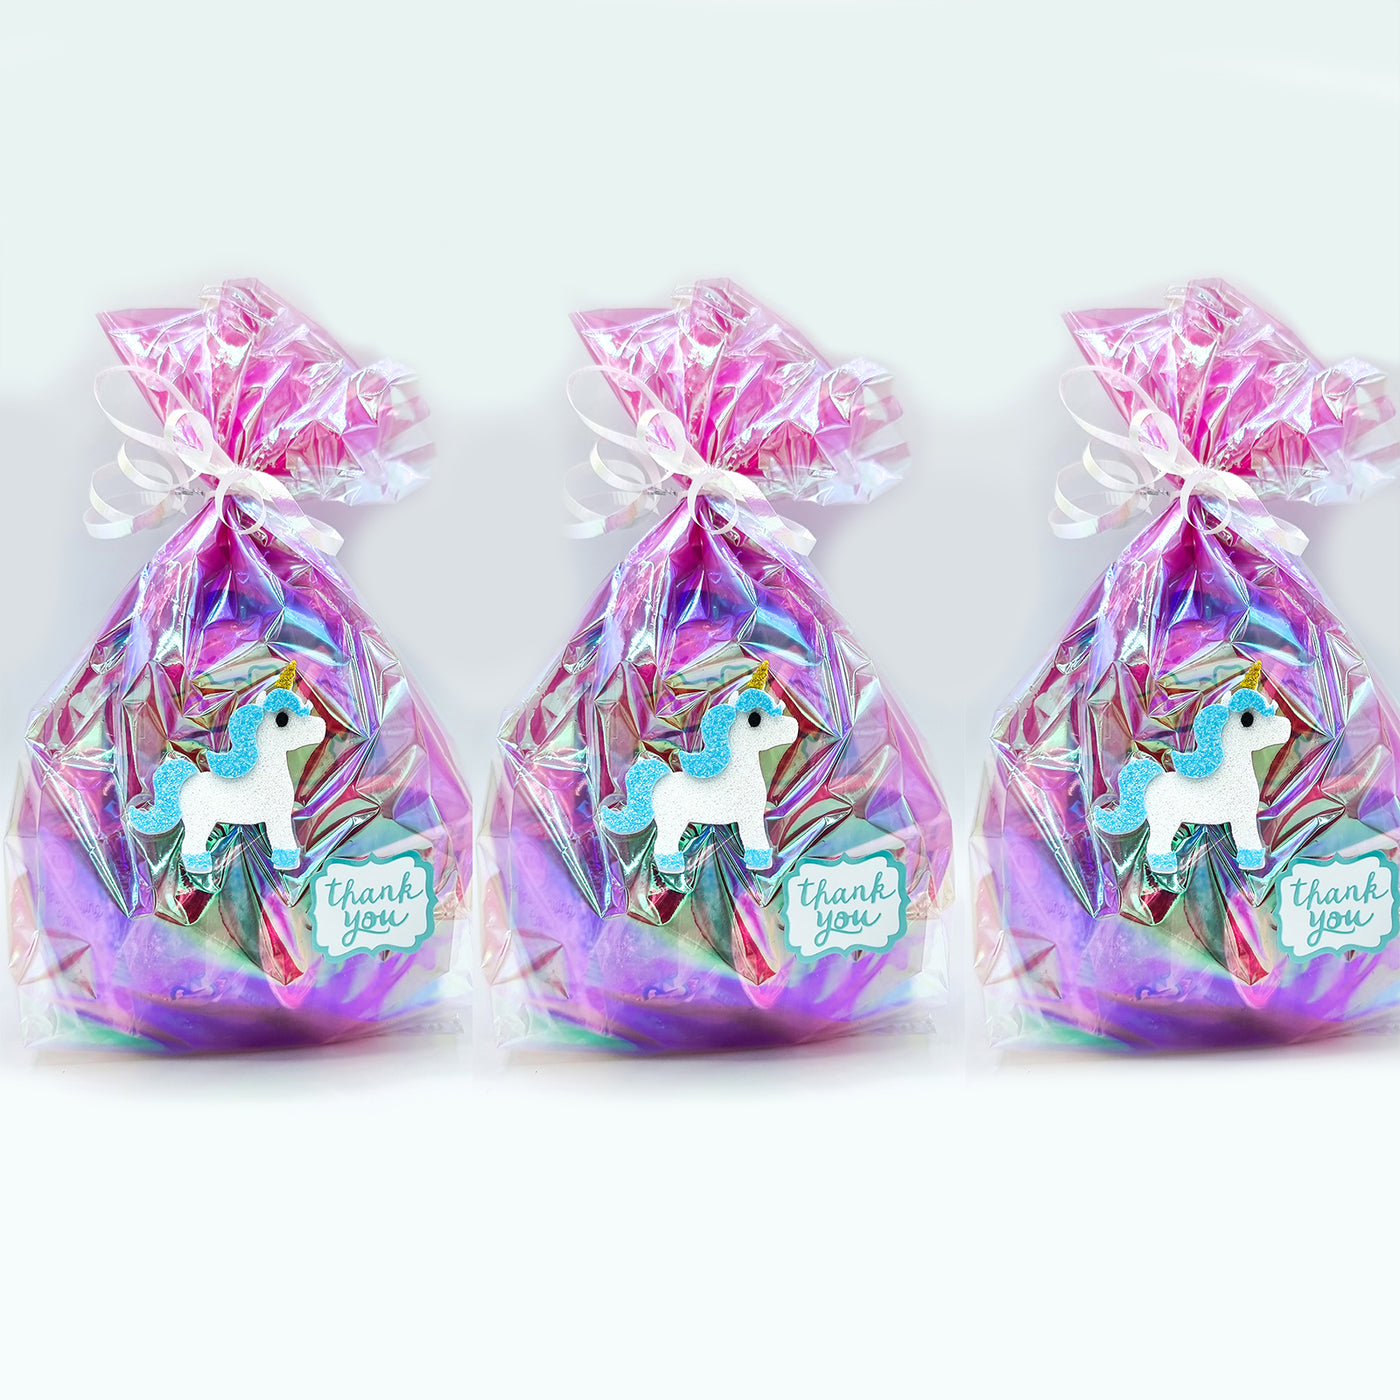 Girls Pre Filled Unicorn Party Bags, Unicorn Goody Bags, Unicorn Party Favours With Toys And Sweets.